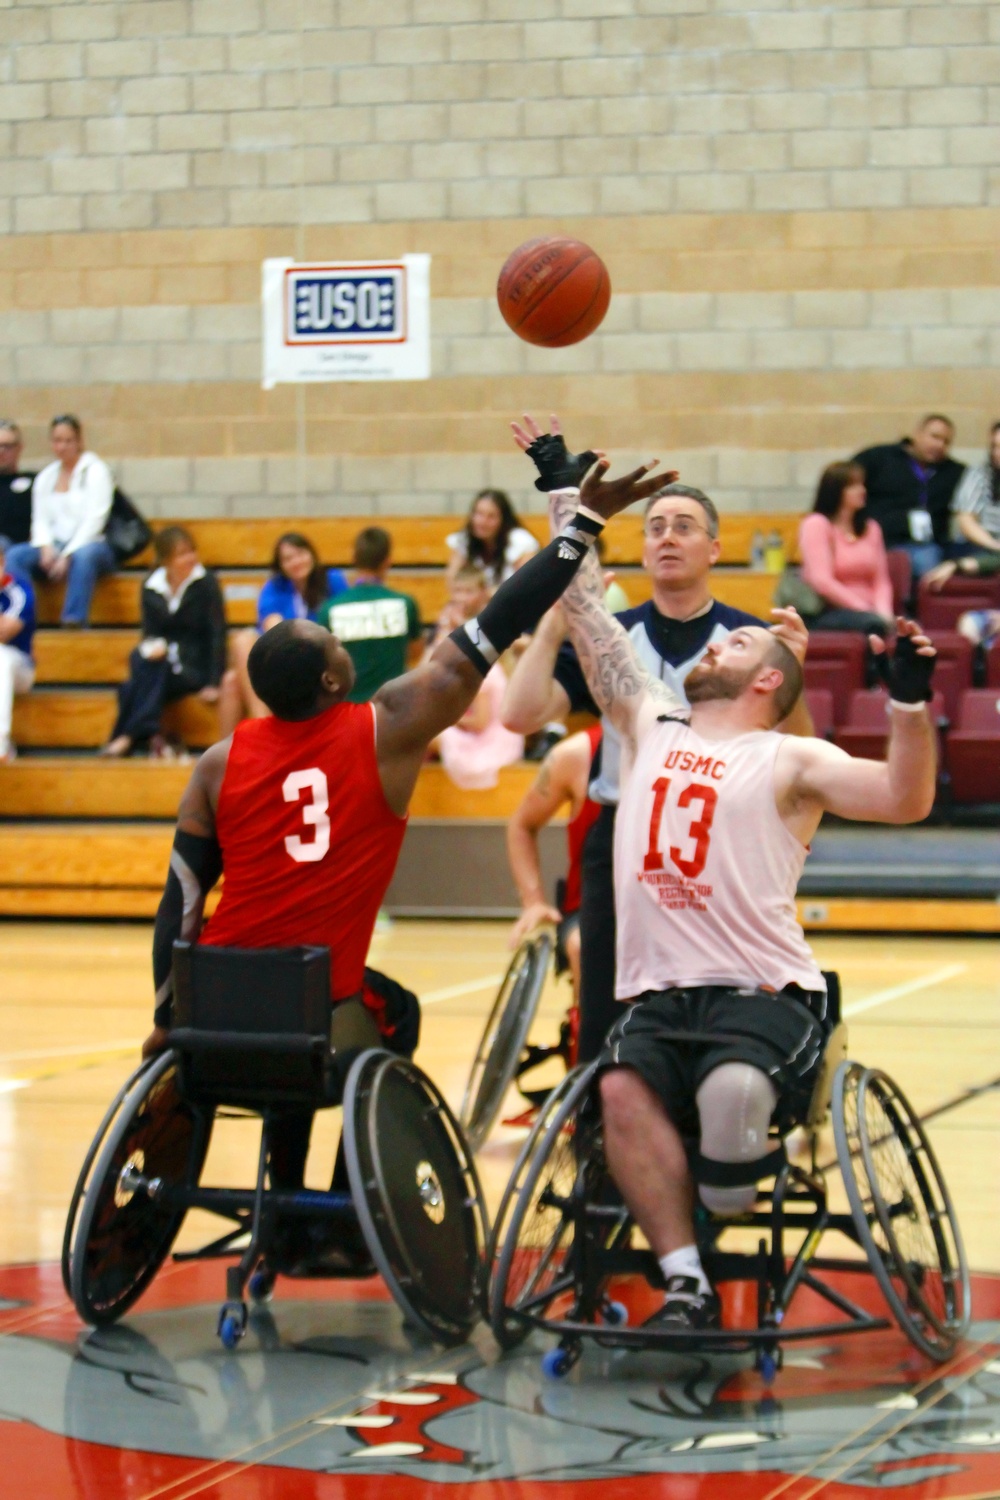 2013 Marine Corps Trials wheelchair basketball competition